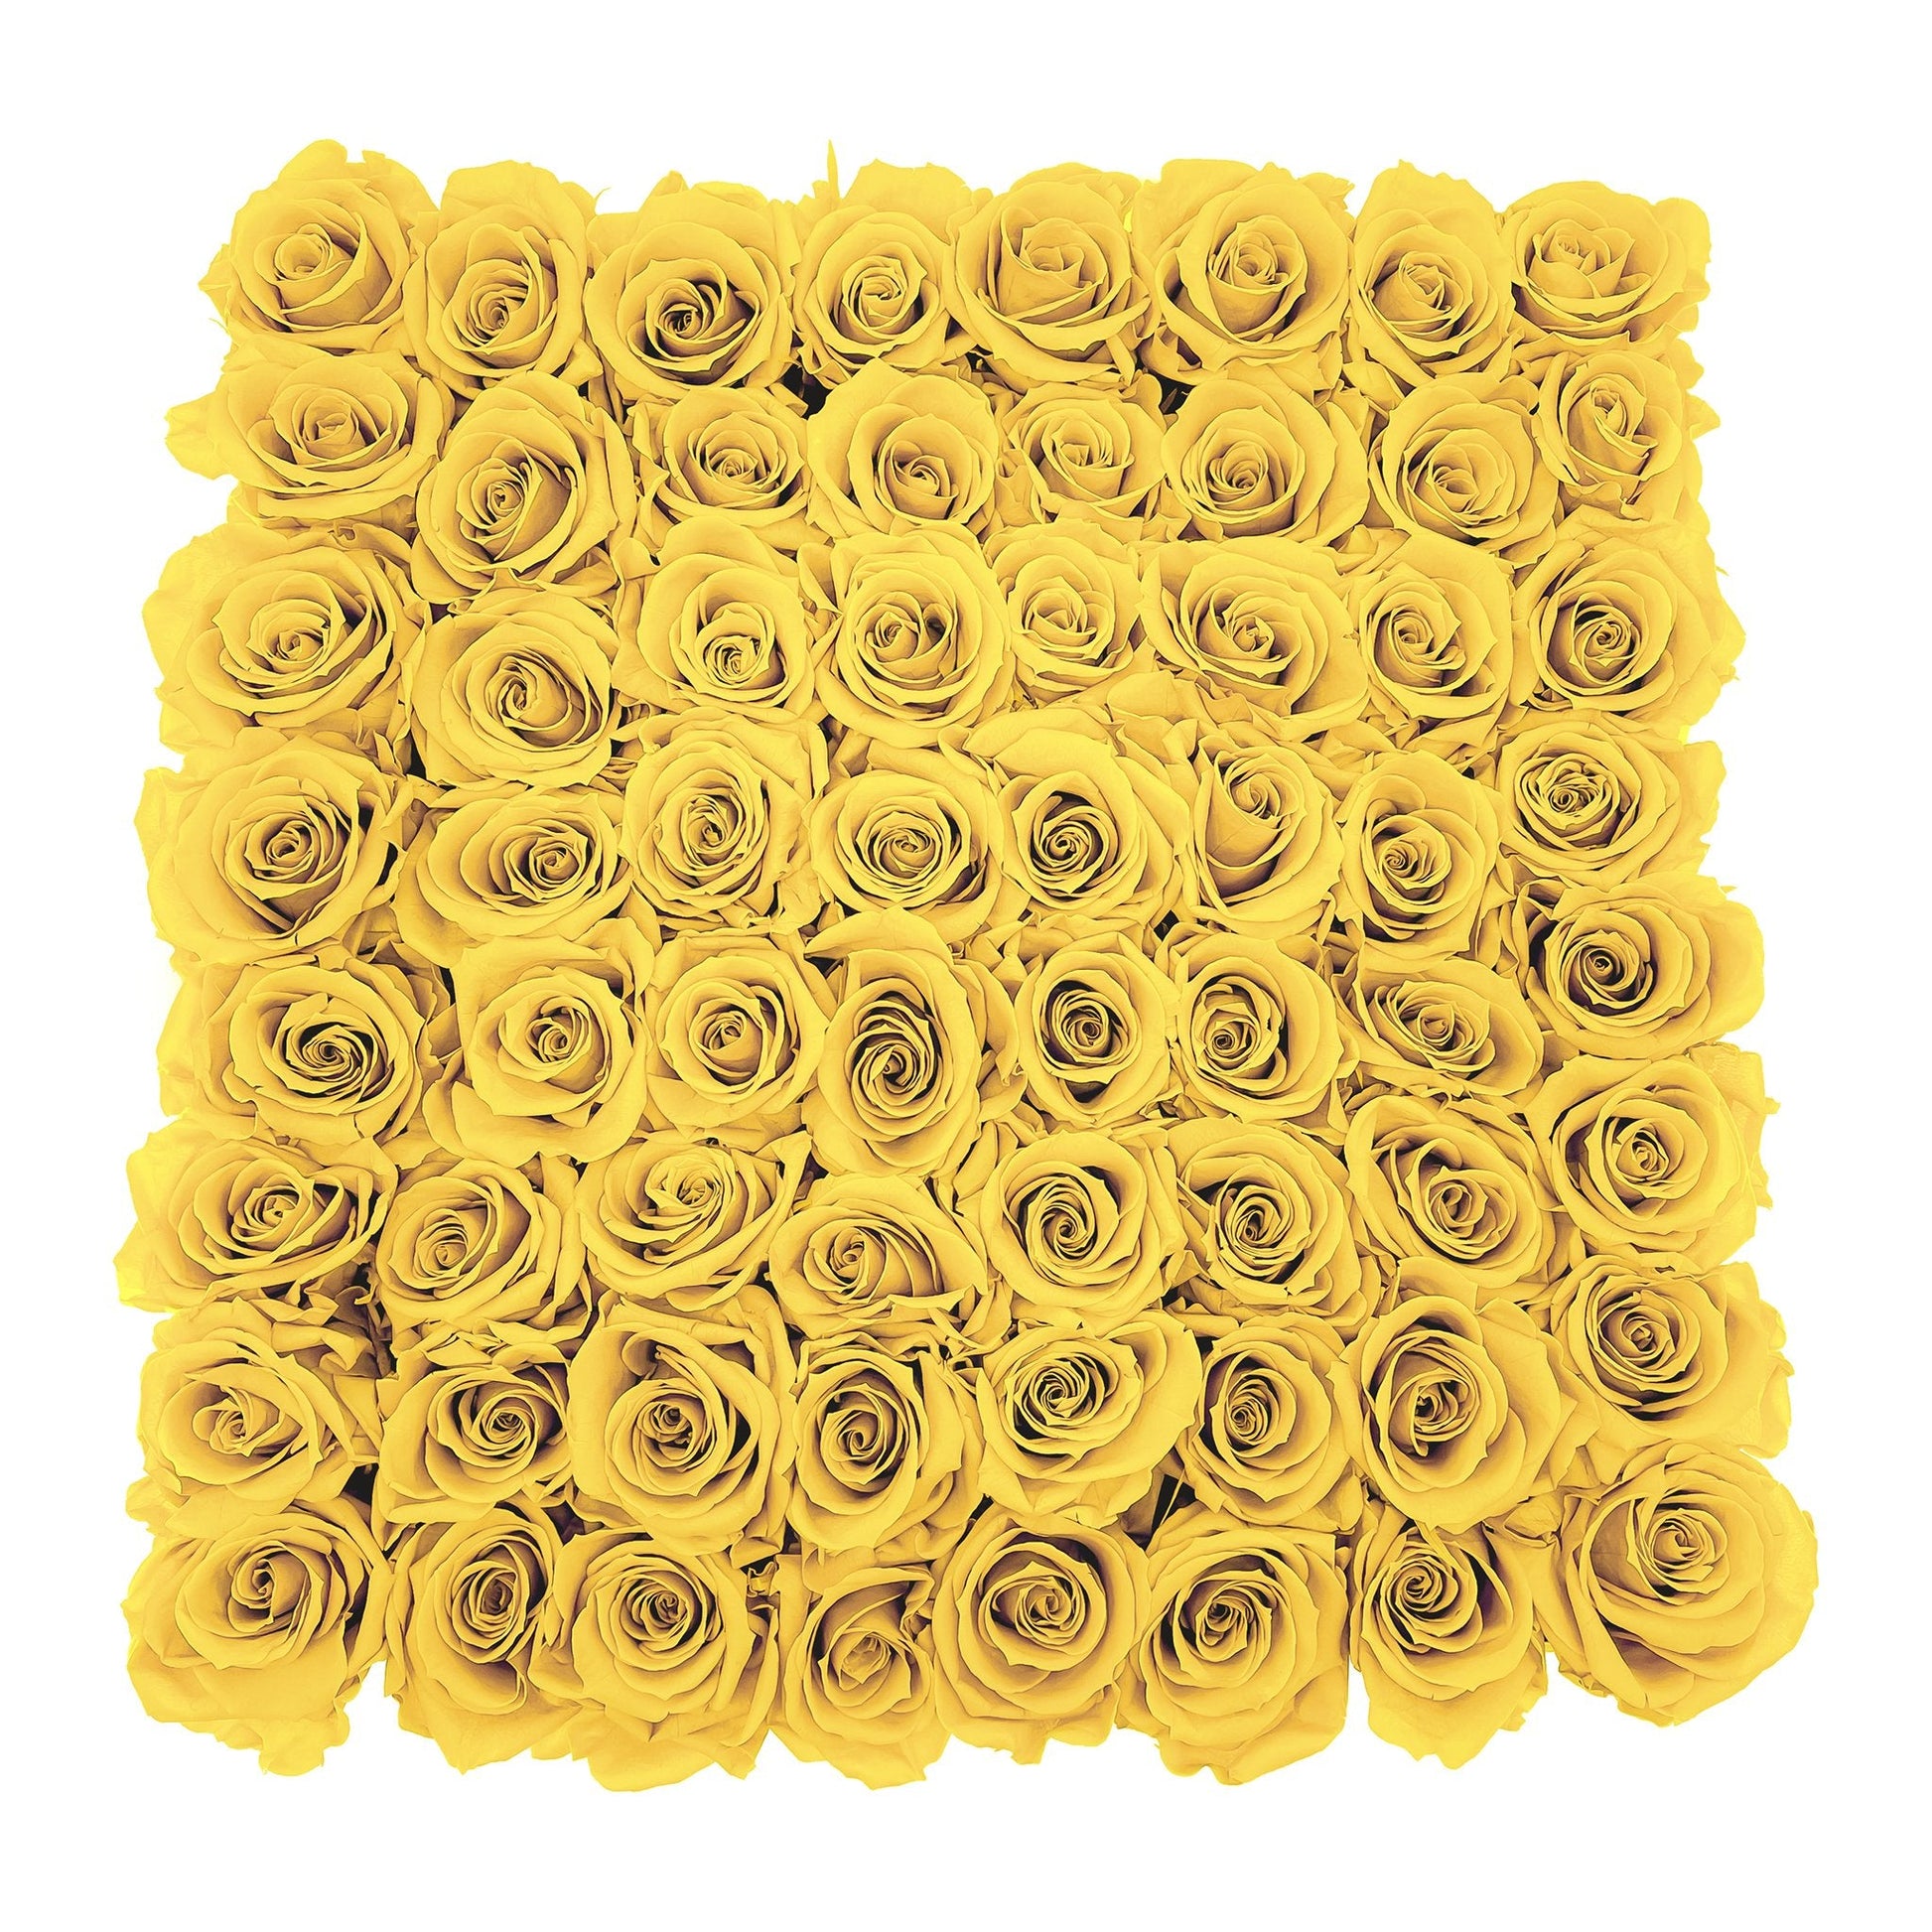 Preserved Roses Large Box | Bright Yellow - Roses - Queens Flower Delivery